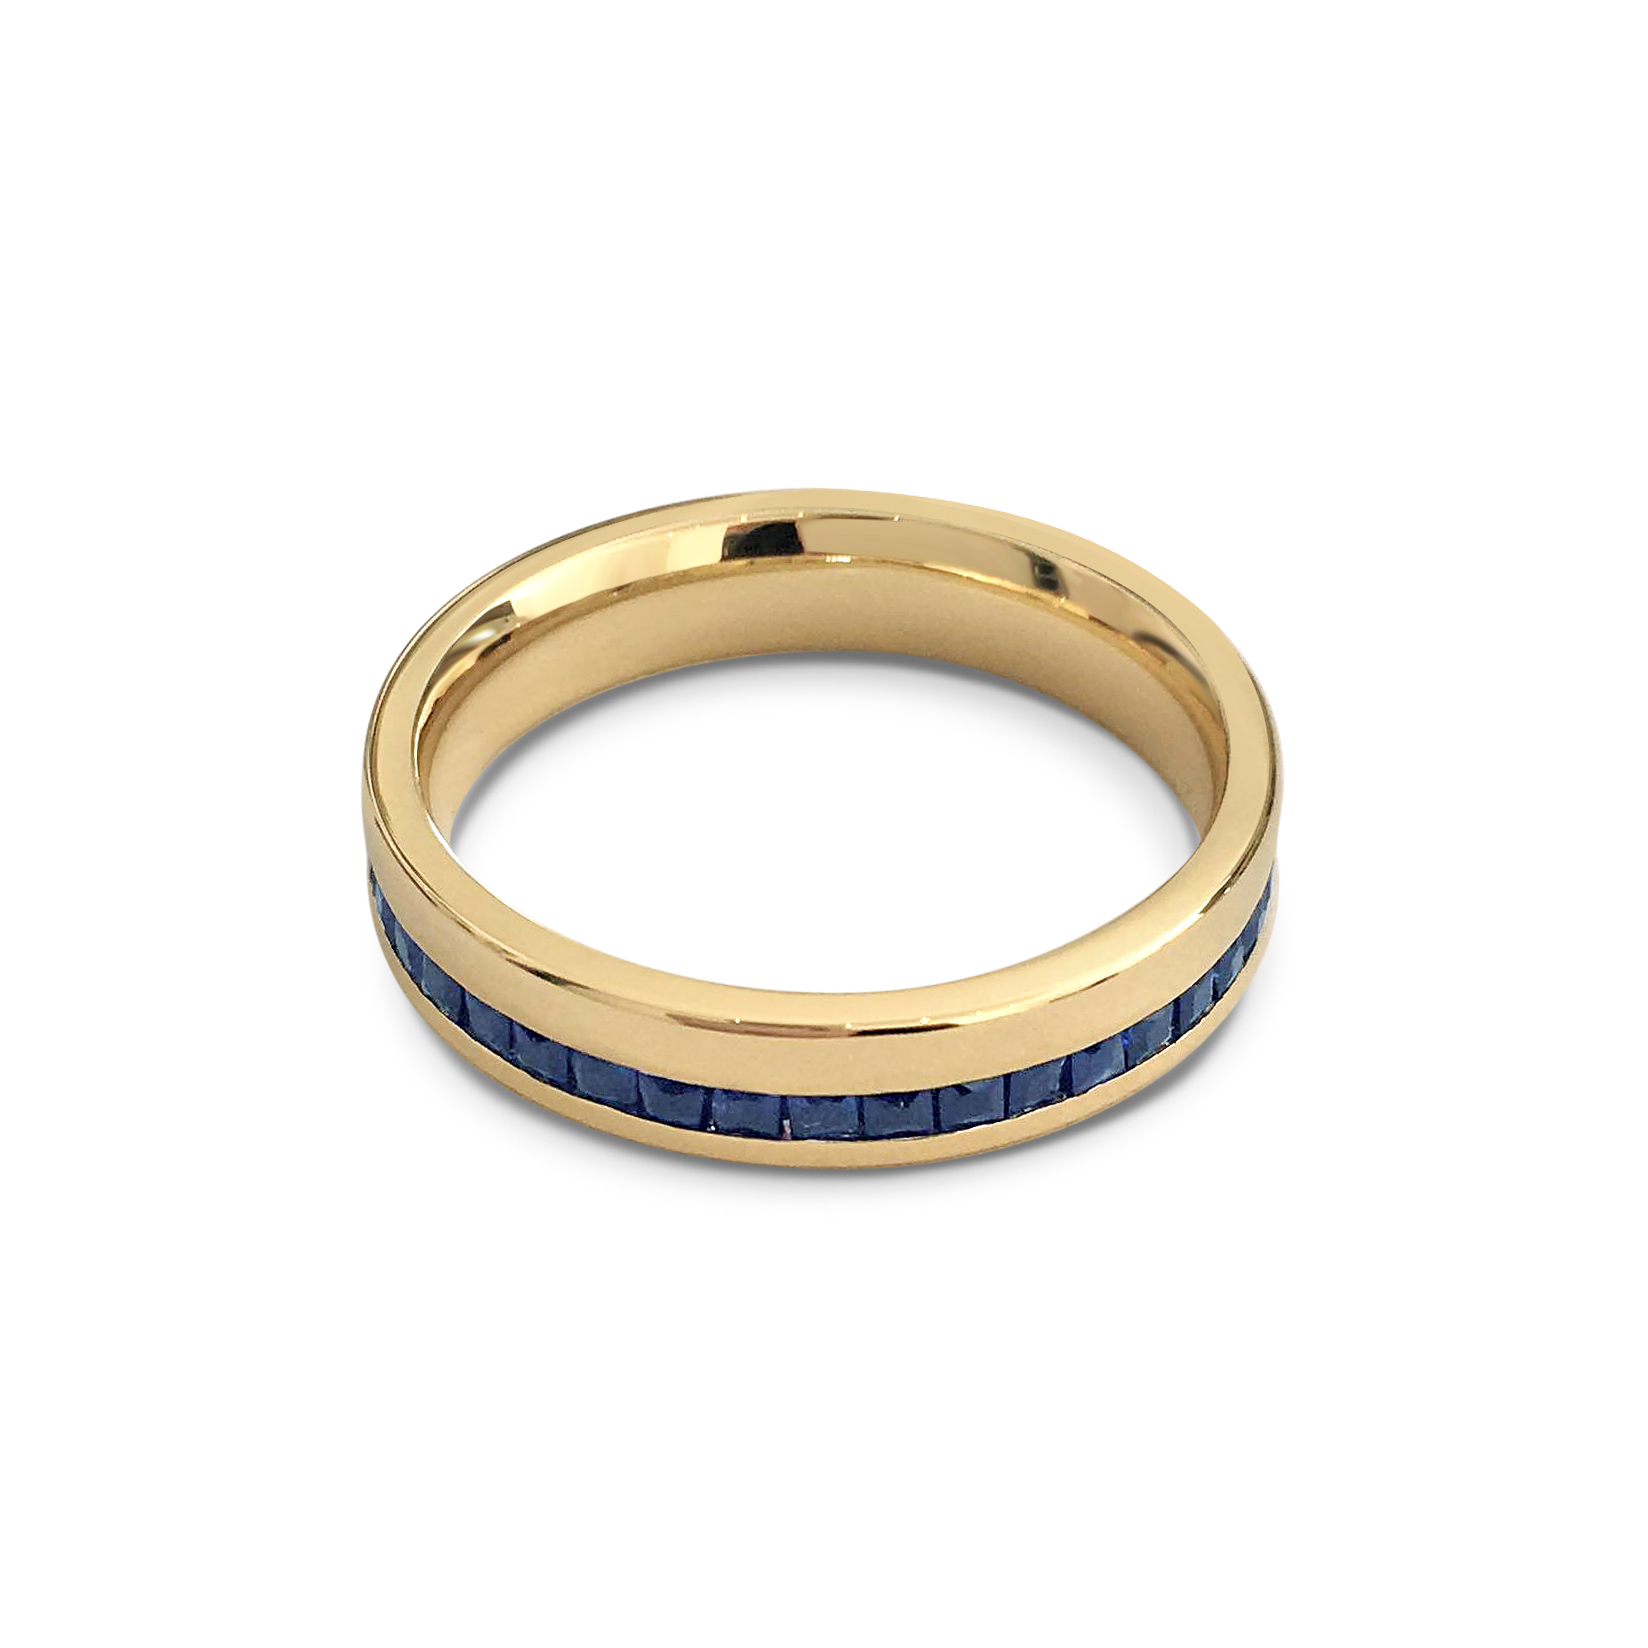 Sapphire-and-18ct-yellow-gold-ring.jpg